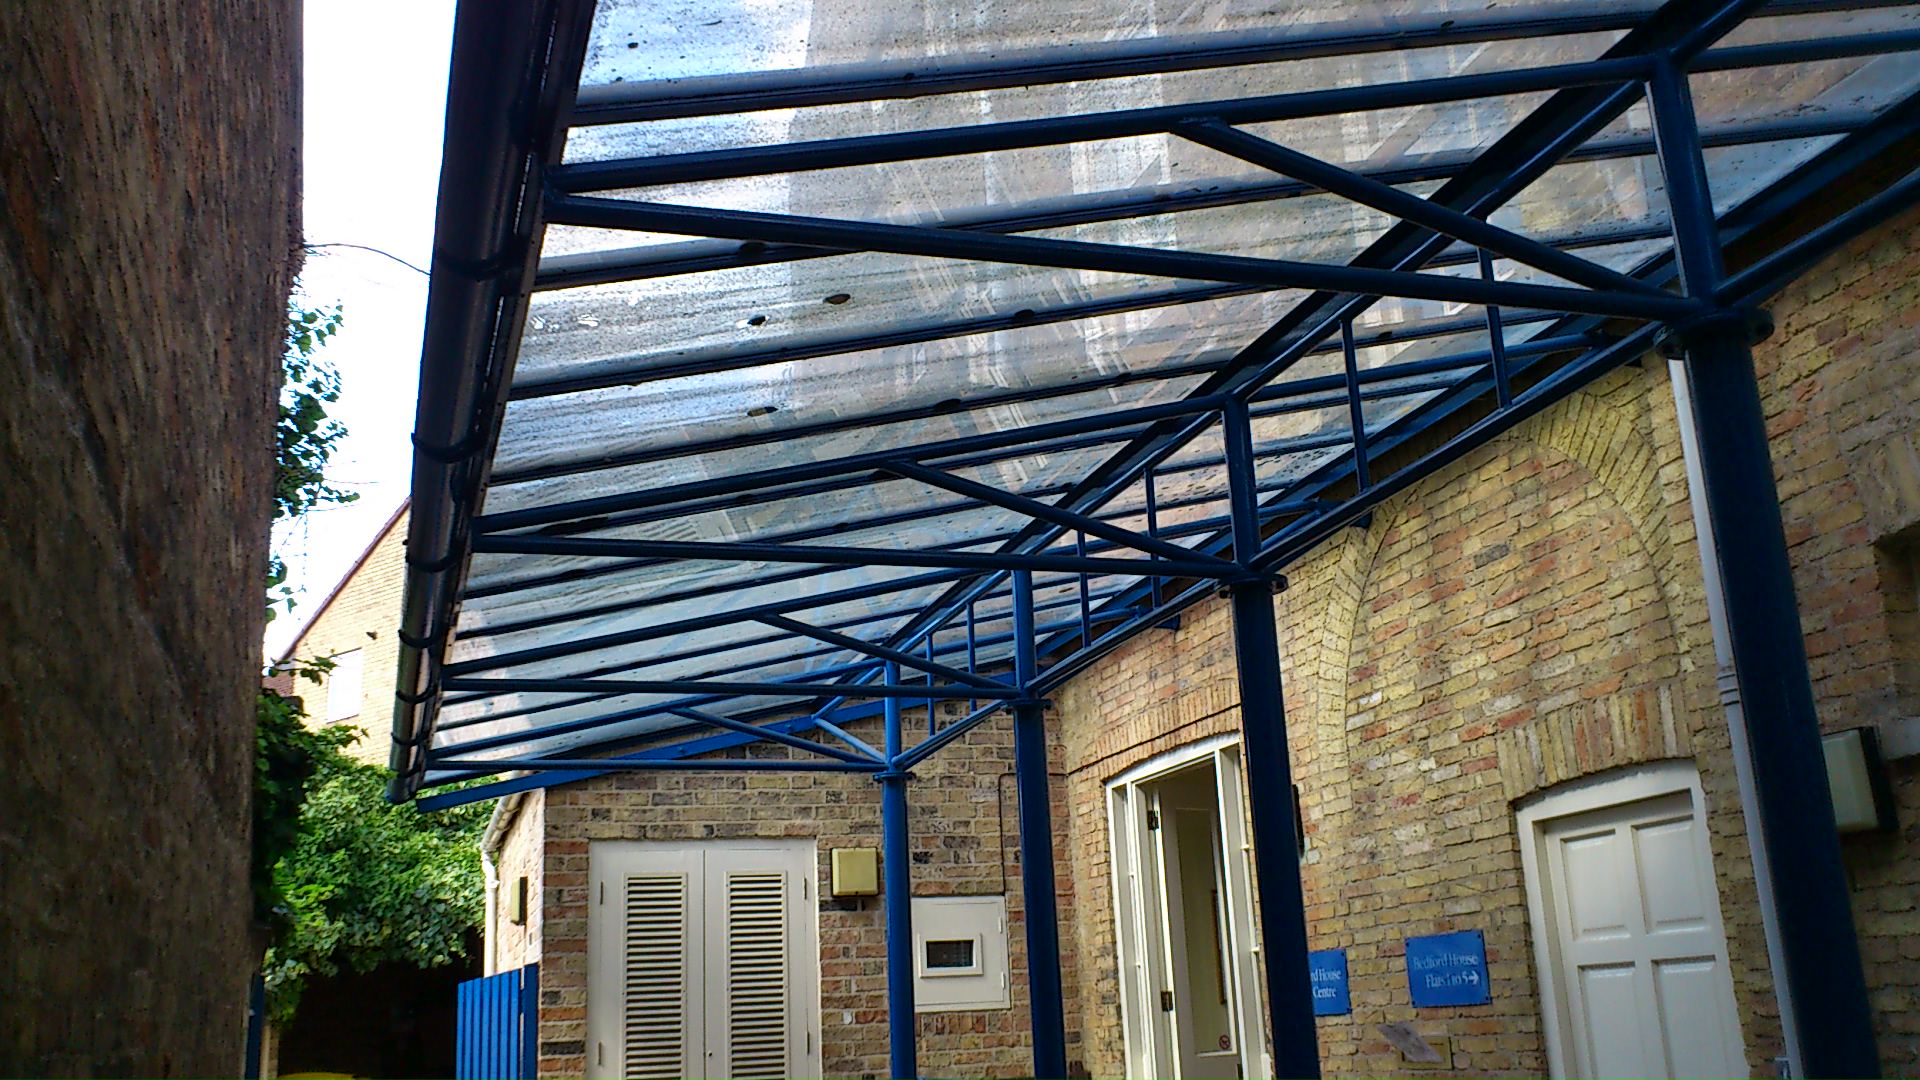 Glass entrance canopy cleaning - (Before).